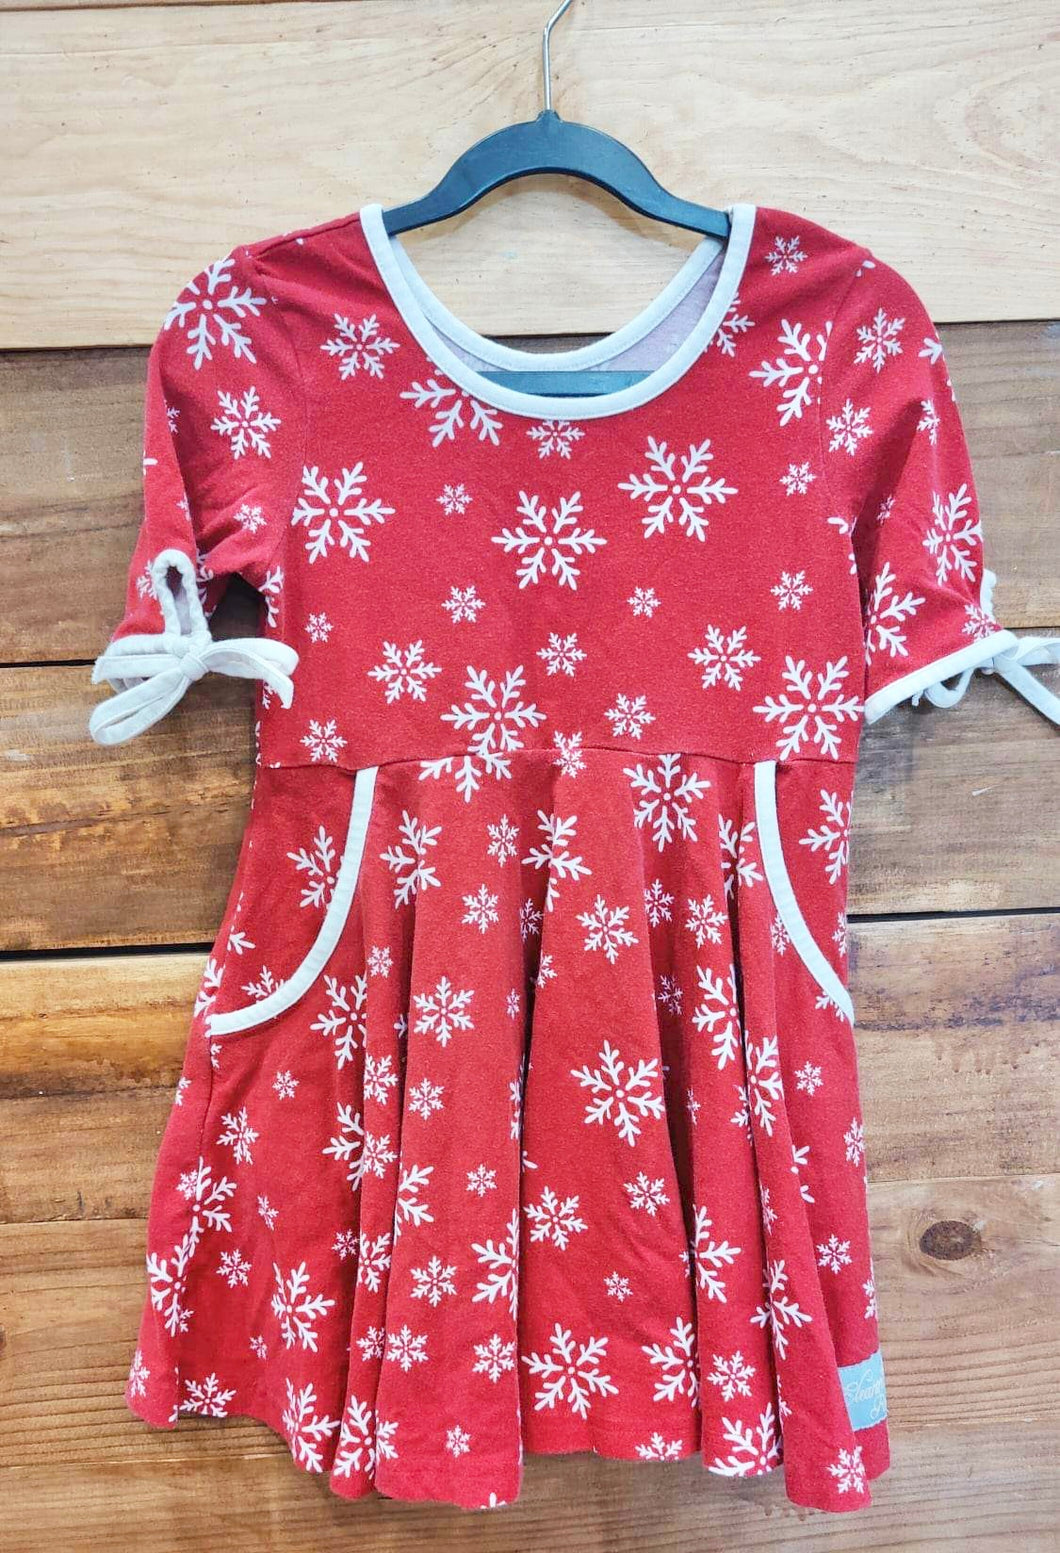 Eleanor Rose Red Snowflake Dress Size 5-6